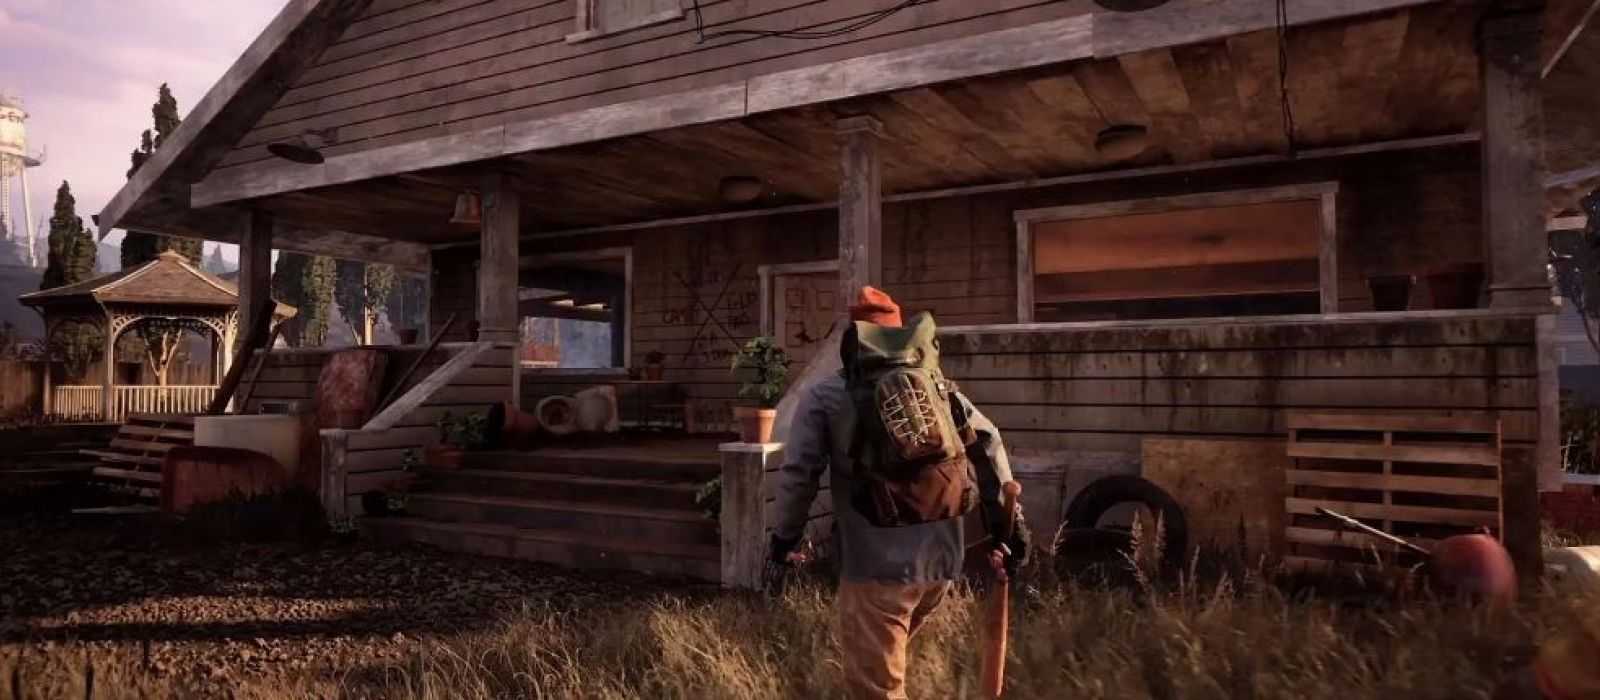 State of decay 3: release date, trailer, news, and more